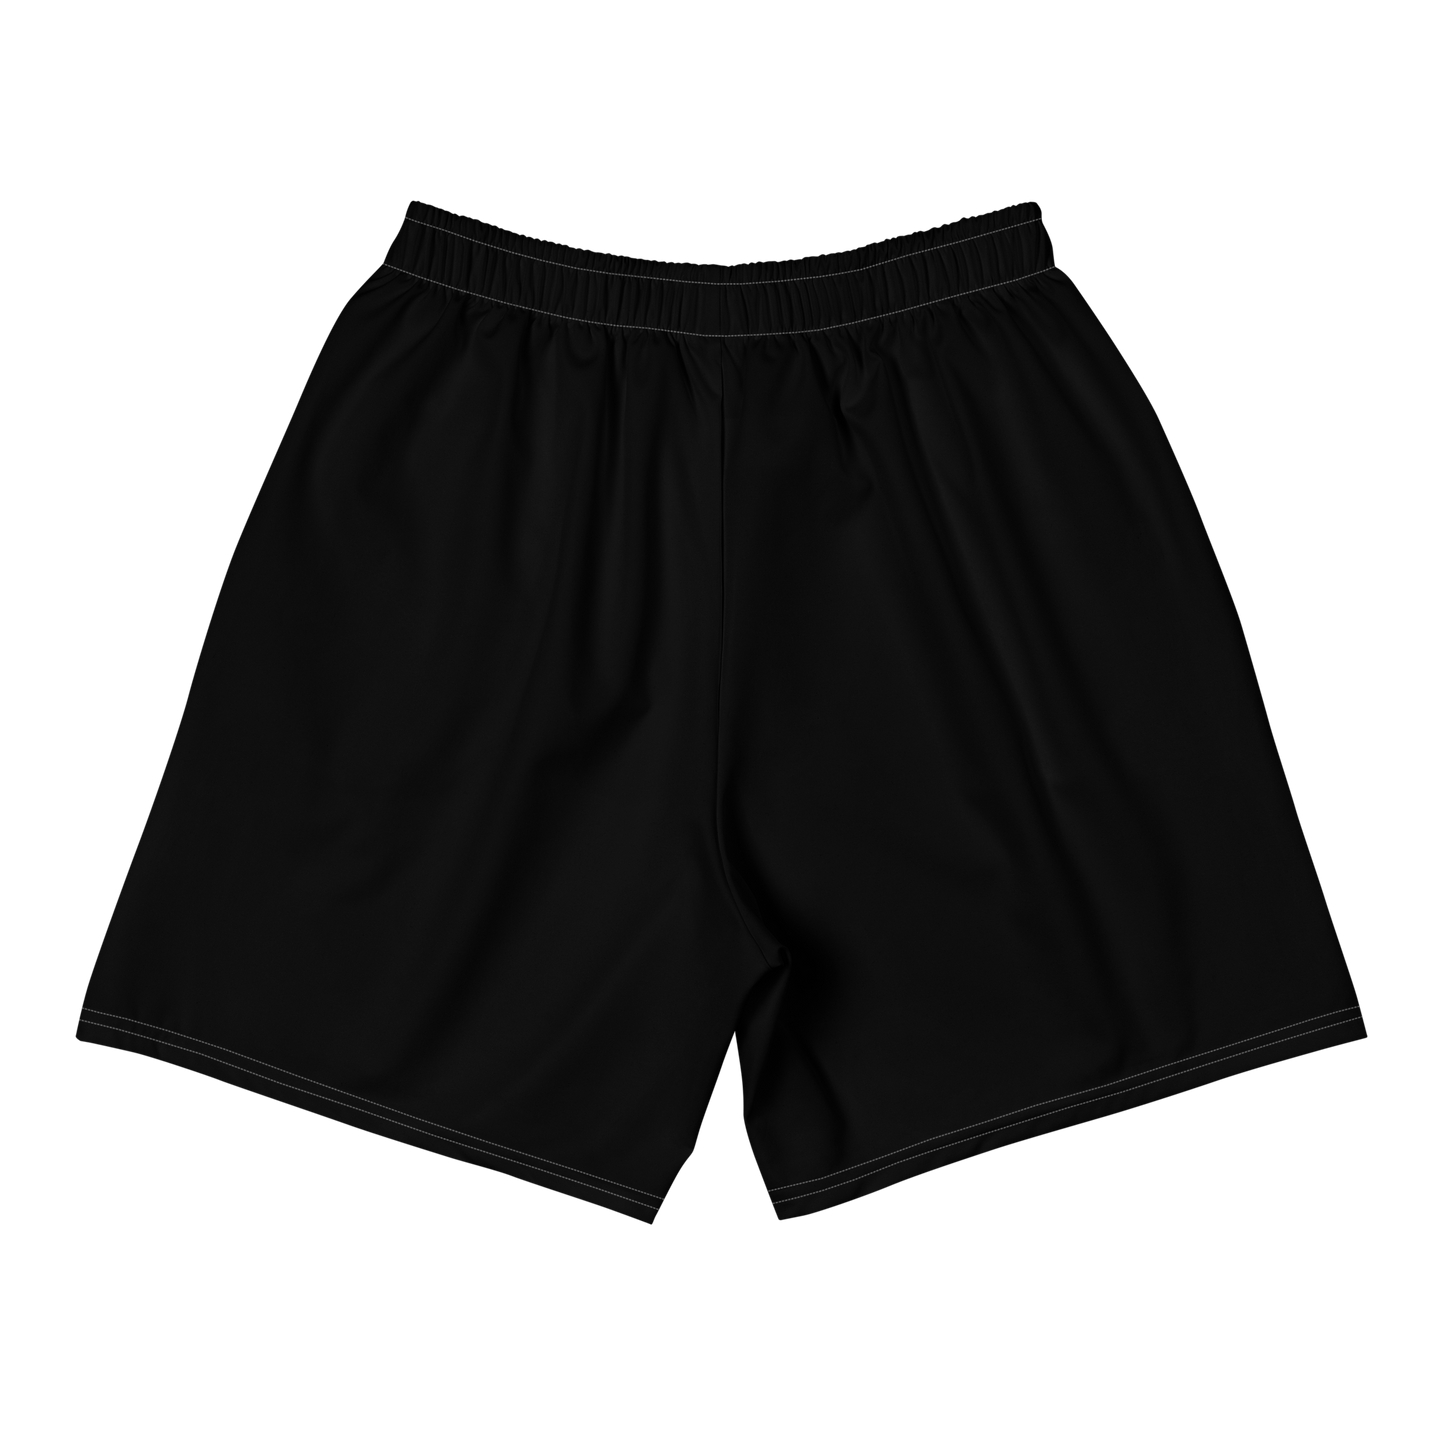 DWMD 'Stained Black' Shorts